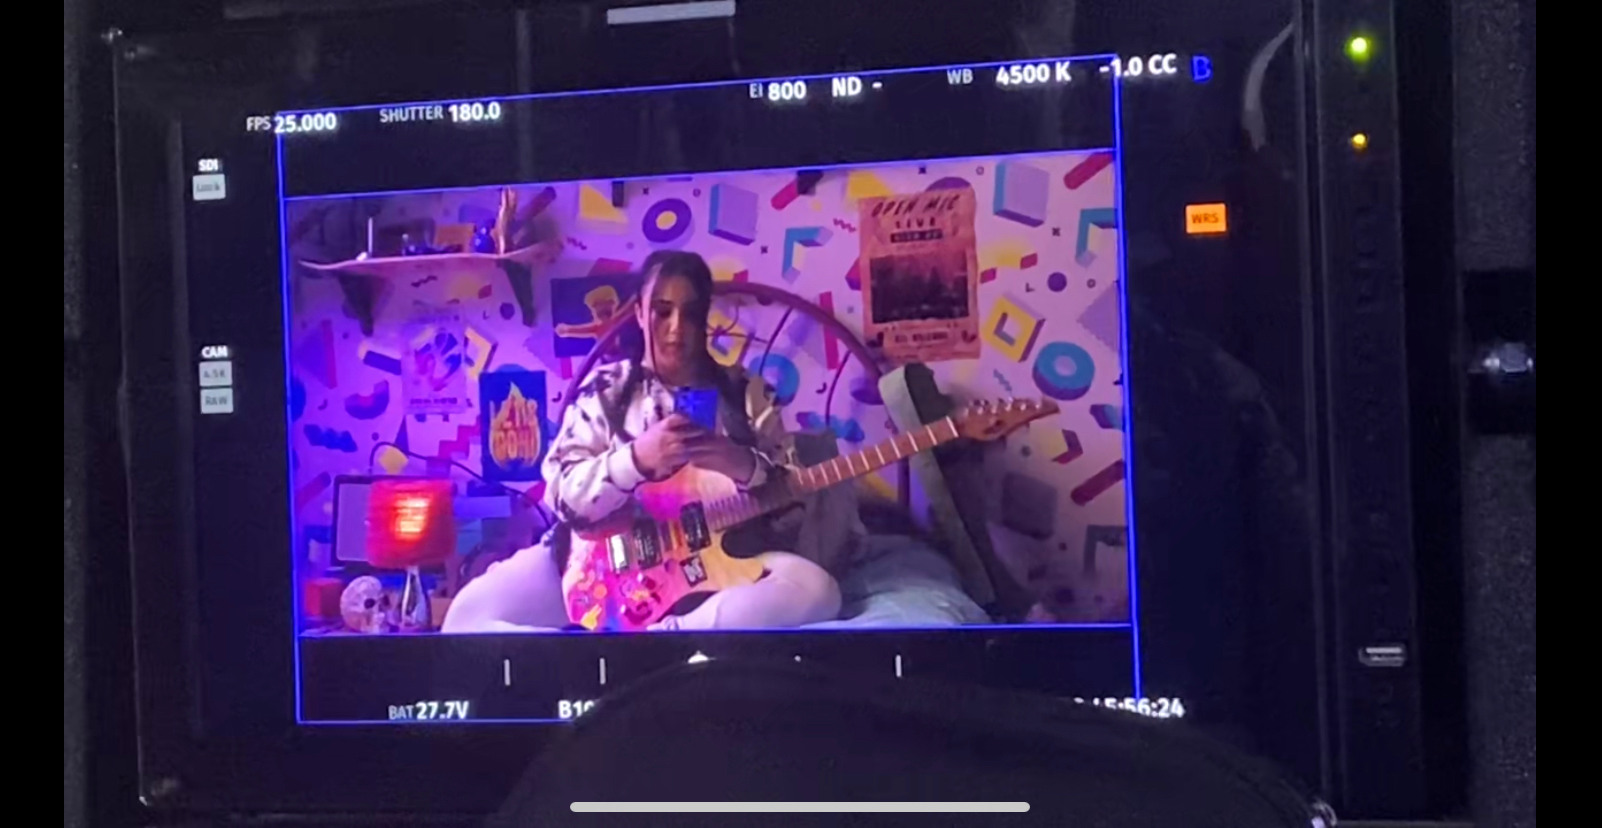 Camera view of Leila Khan on Heartstopper set, sitting on bed with guitar